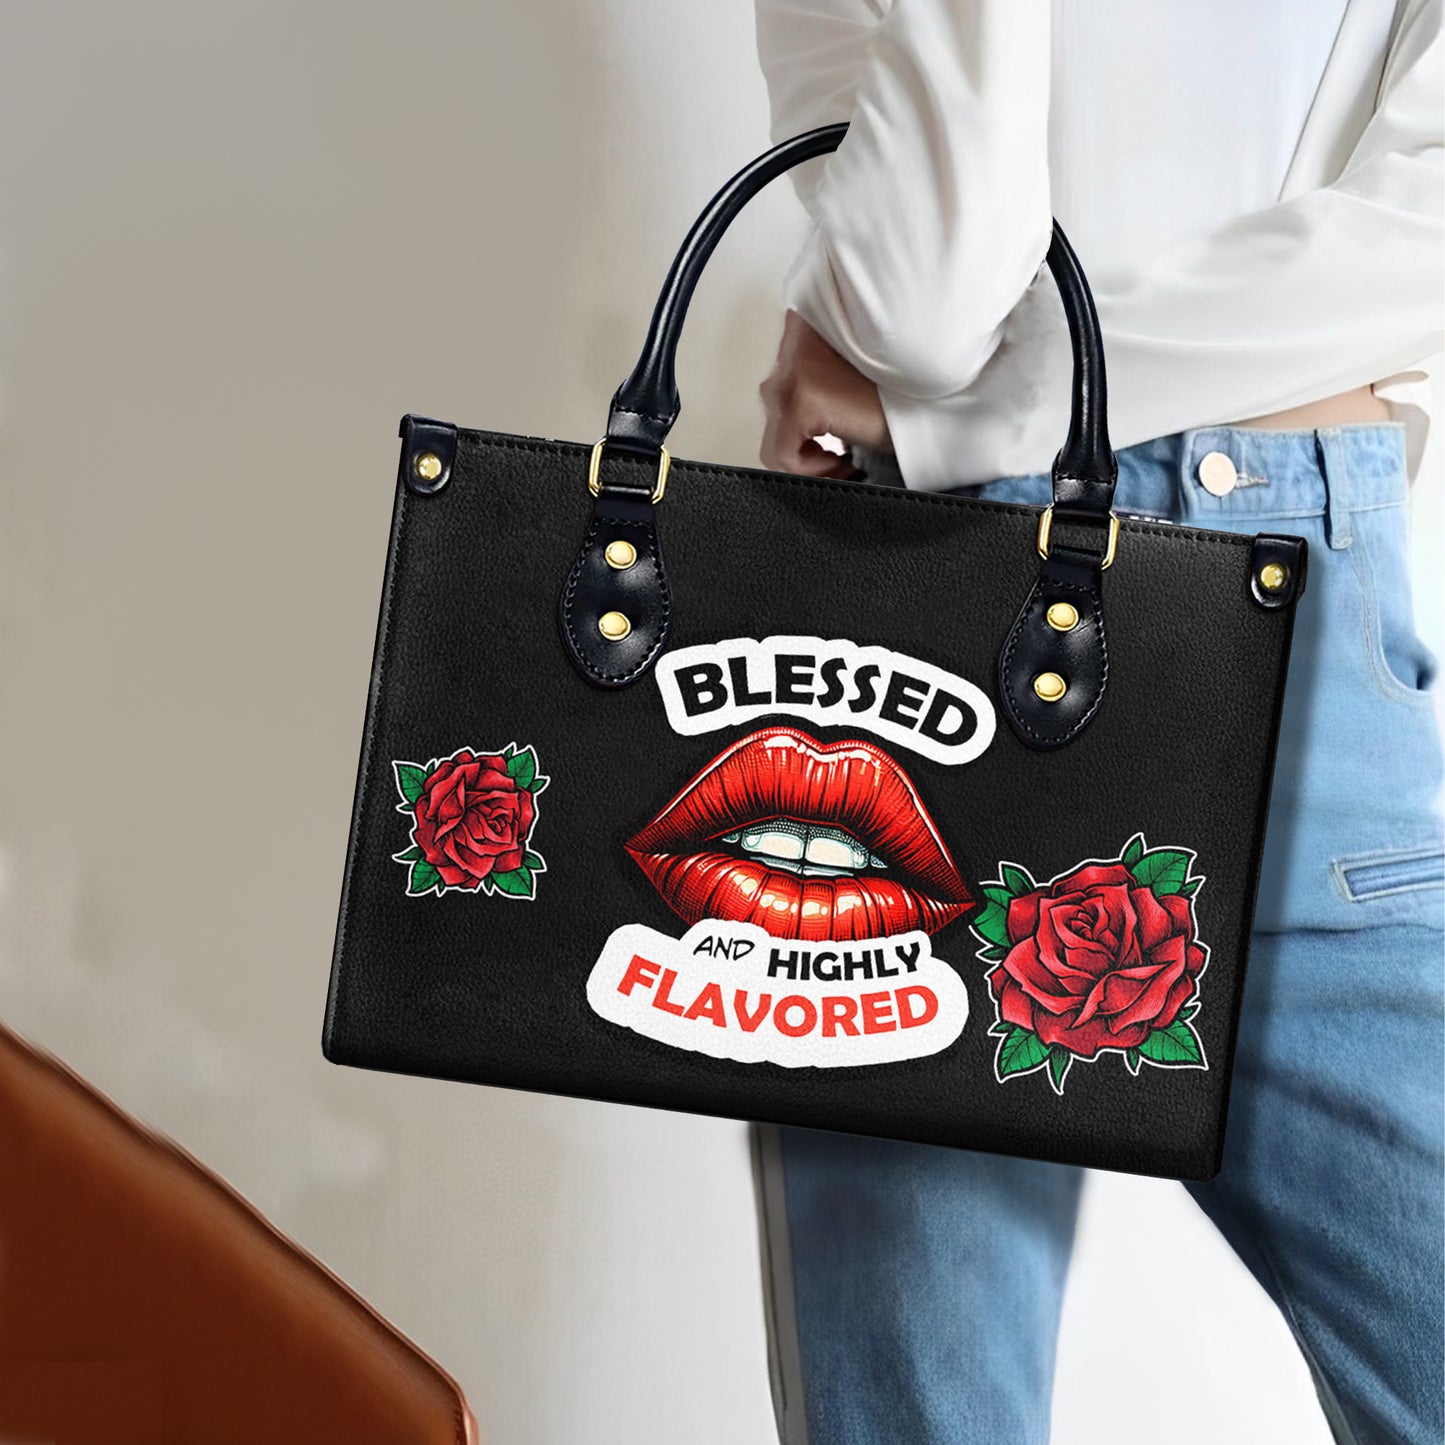 Blessed And Highly Flavored - Bespoke Leather Handbag - DB29